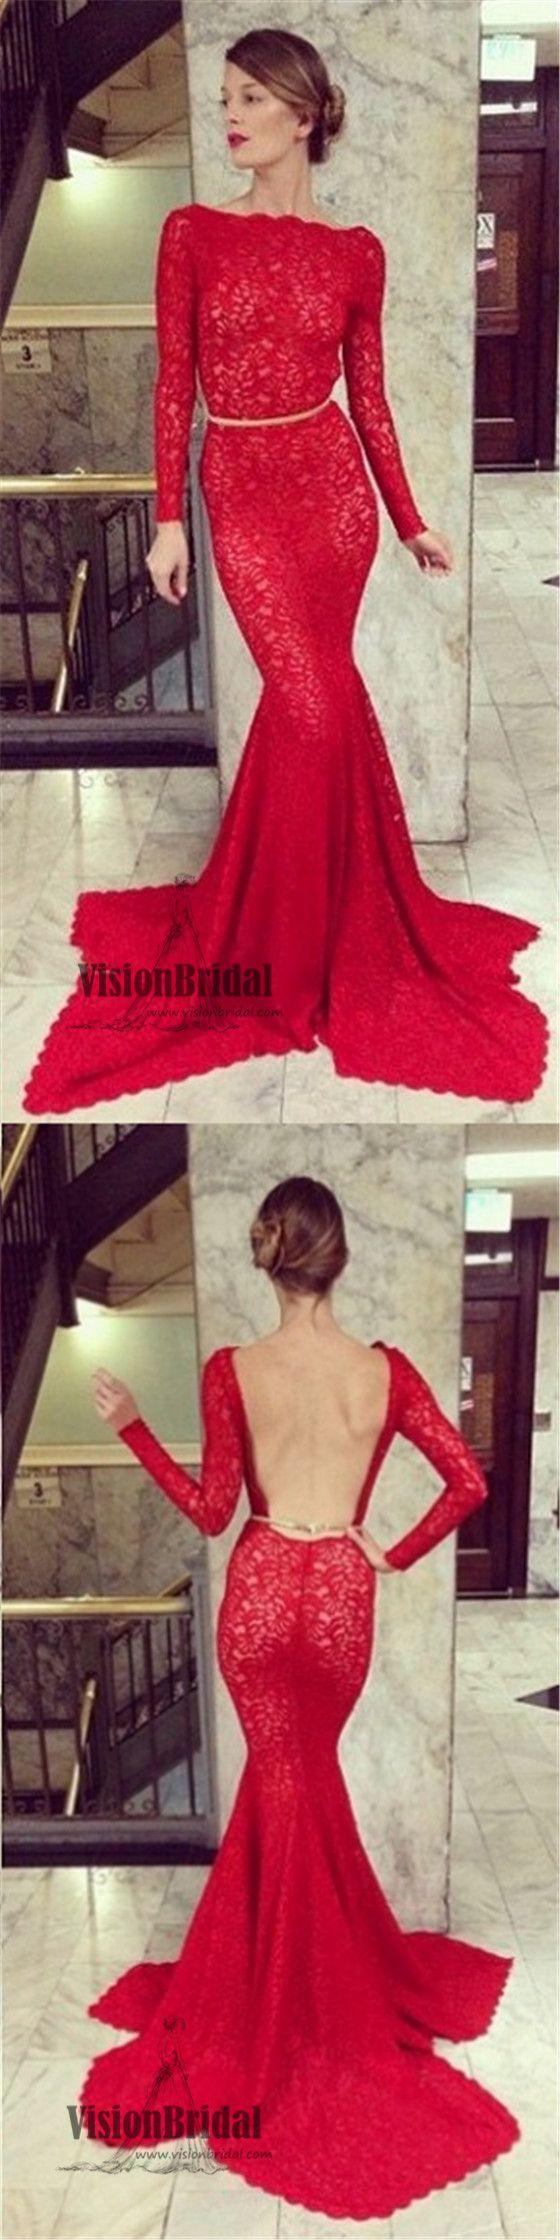 Mariage - Red Long Sleeves Lace Mermaid Prom Dress, Open Back Prom Dress With Golden Band, Prom Dress, VB0214